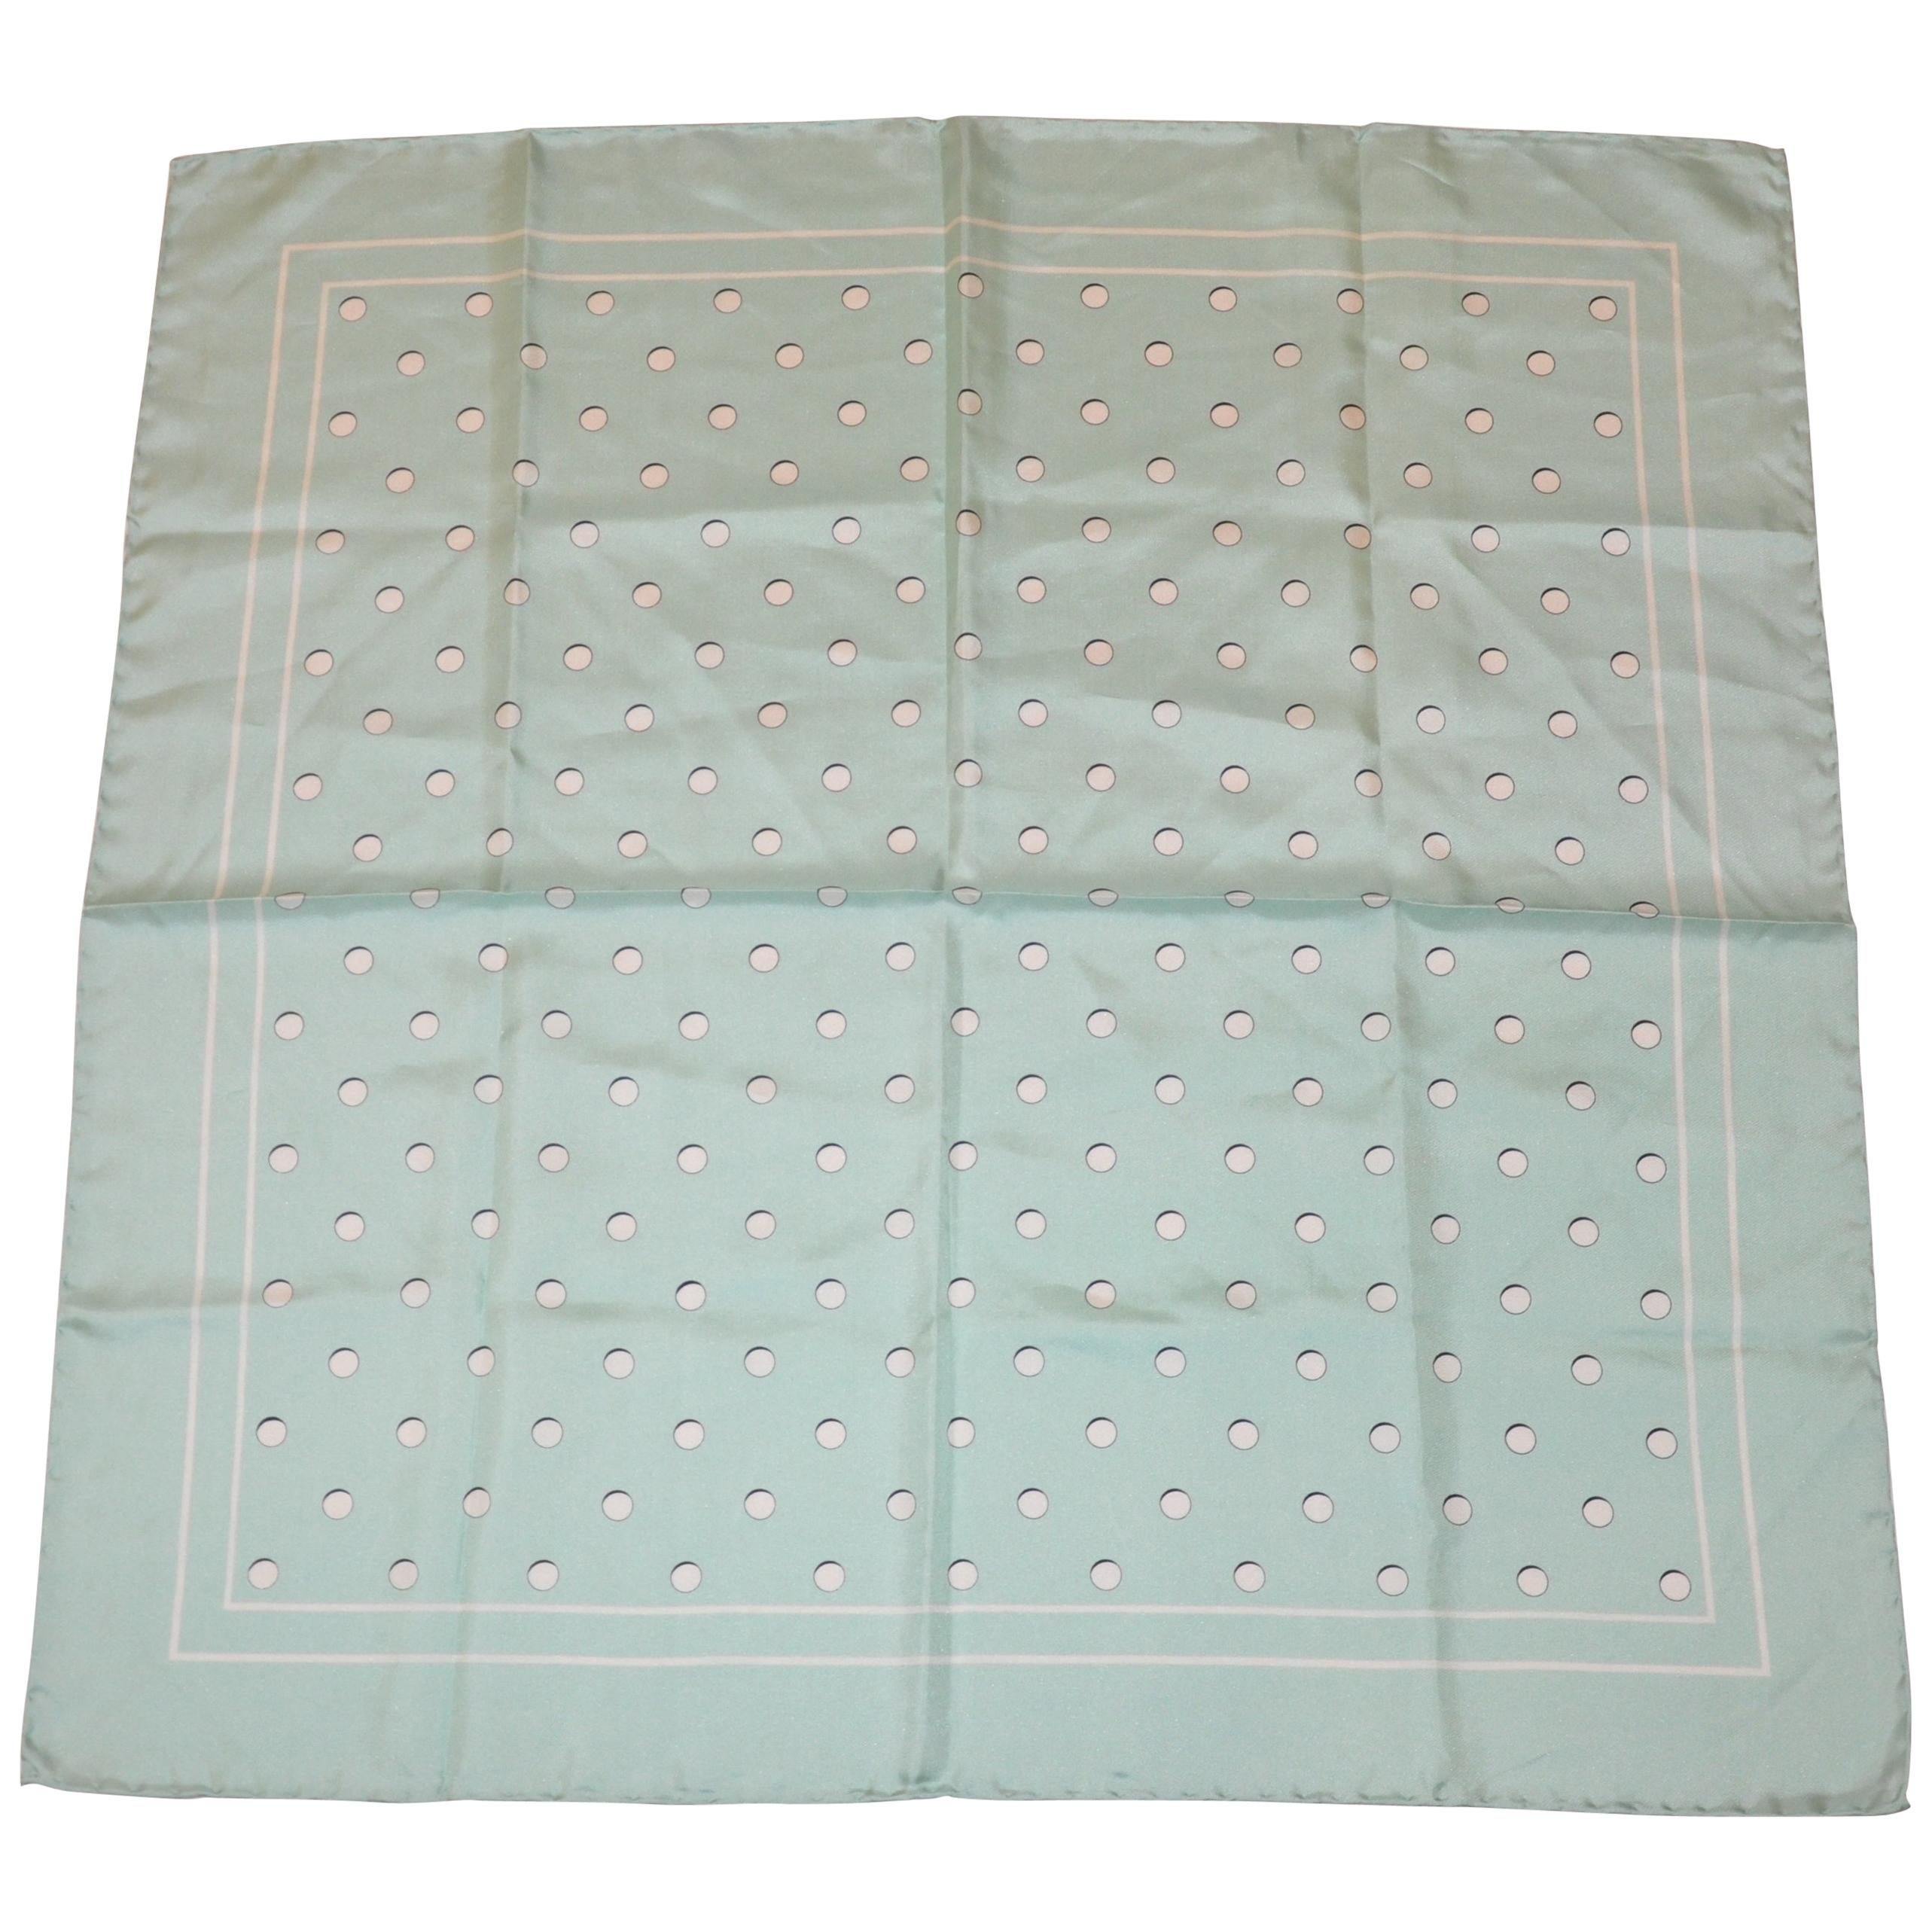 Jade-Green & Ivory Polka Dot Silk Scarf with Hand-Rolled Edges For Sale